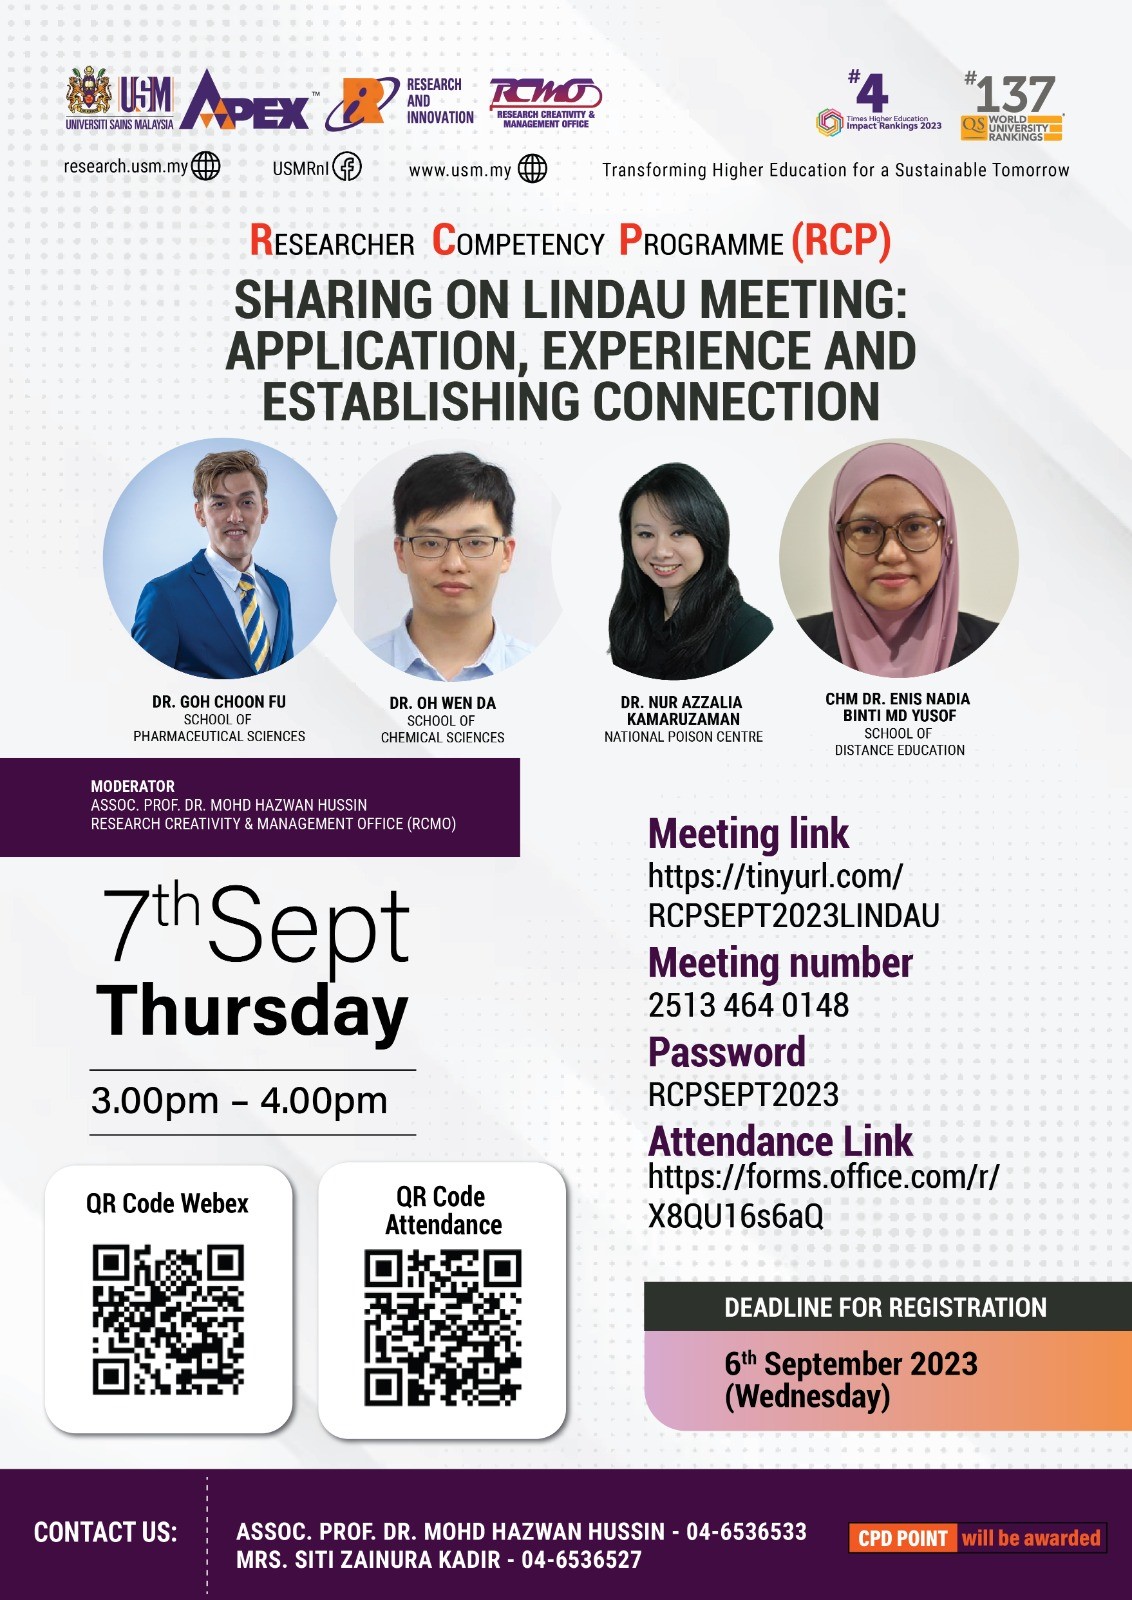 eposter RCP SHARING ON LINDAU MEETING APPLICATION EXPERIENCE AND ESTABLISHING CONNECTION